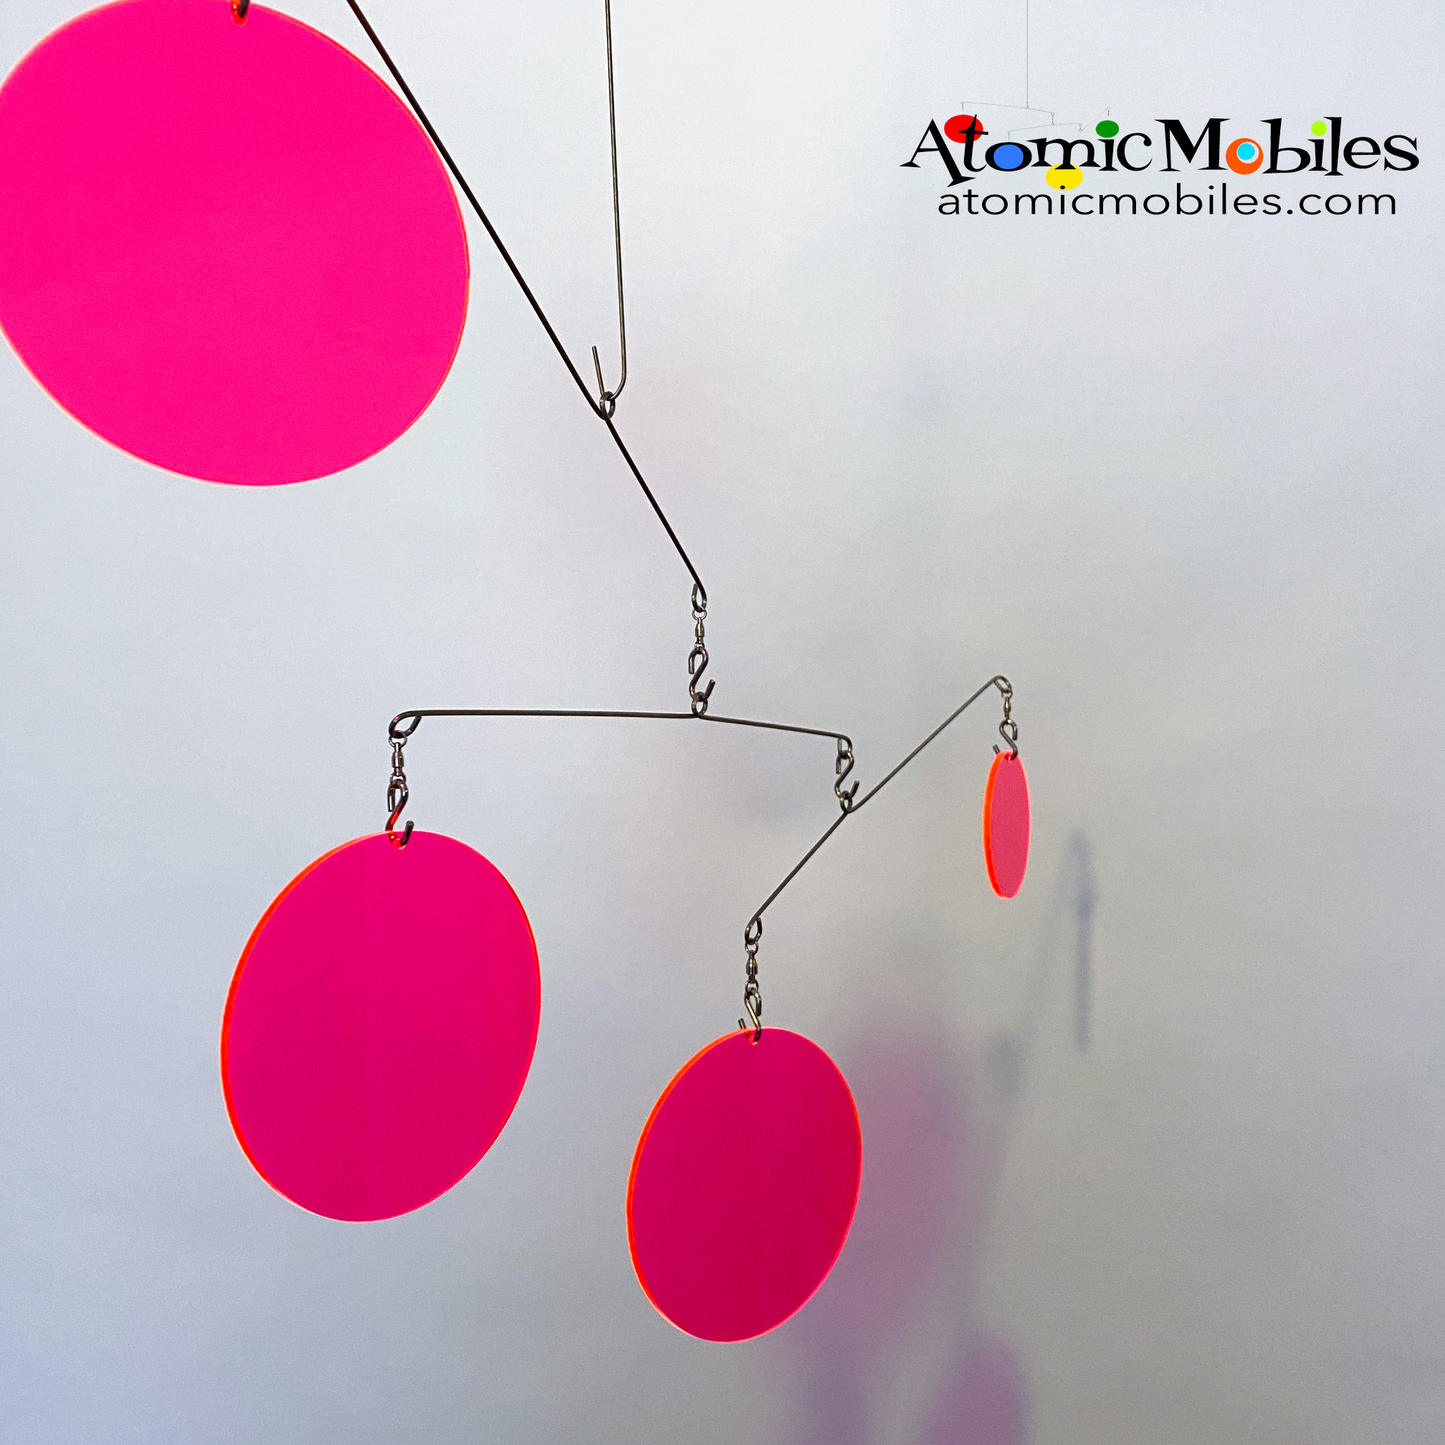 Neon Fluorescent Hot Pink Atomic Mobile -  hanging modern kinetic art mobiles by AtomicMobiles.com